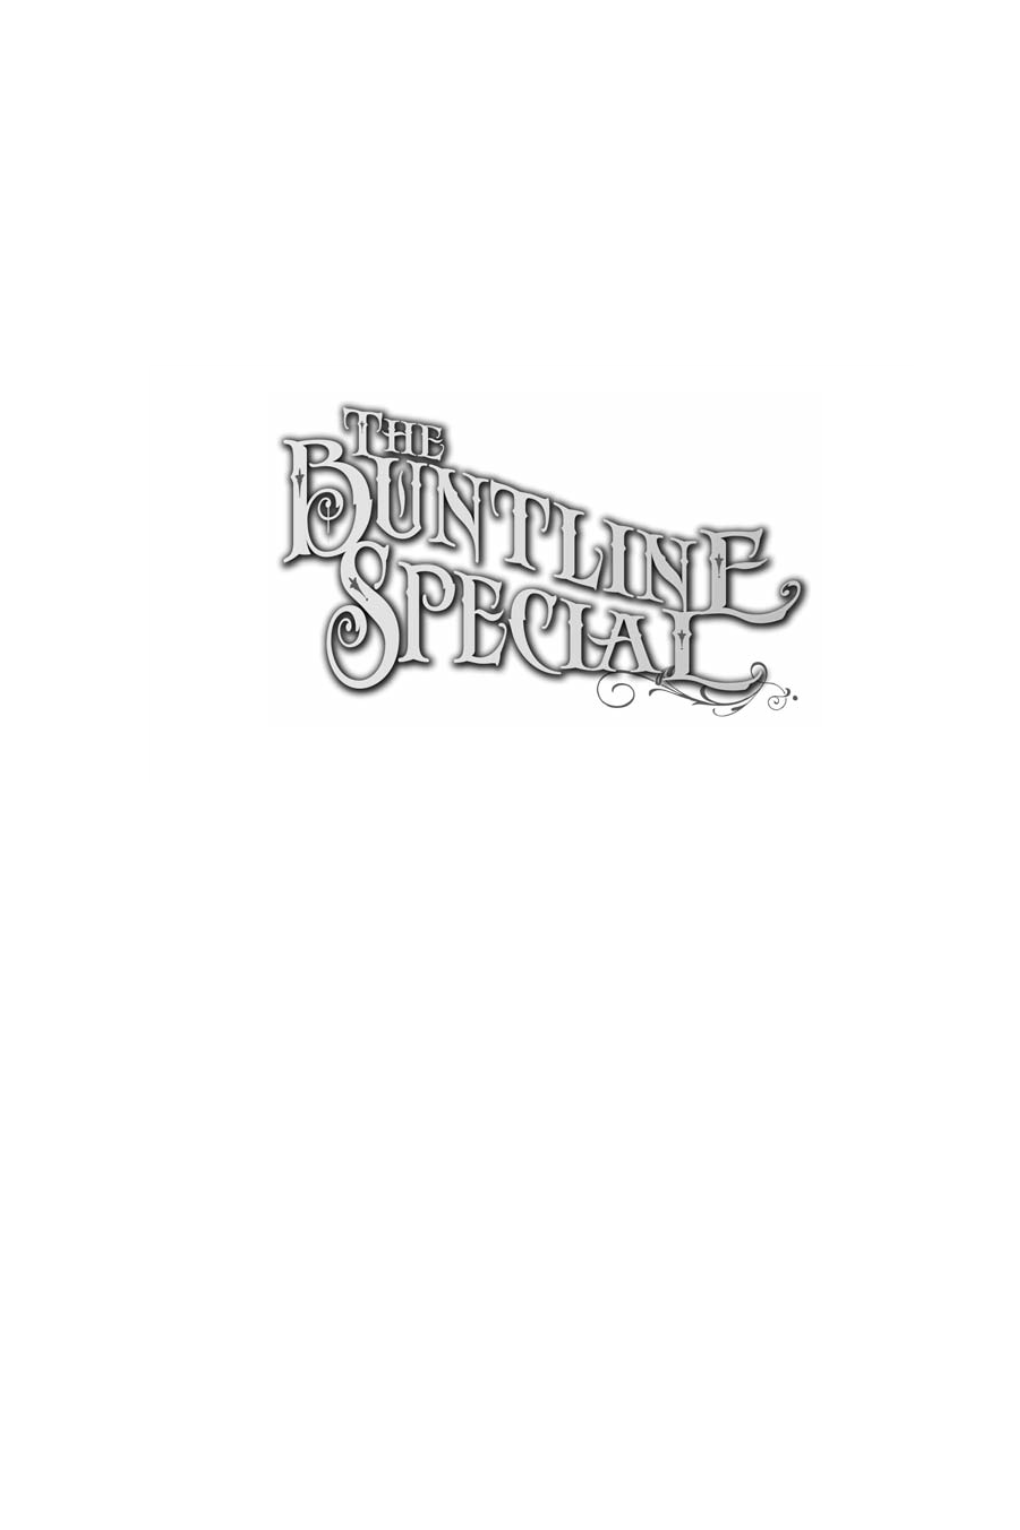 The Buntline Special: a Weird West Tale